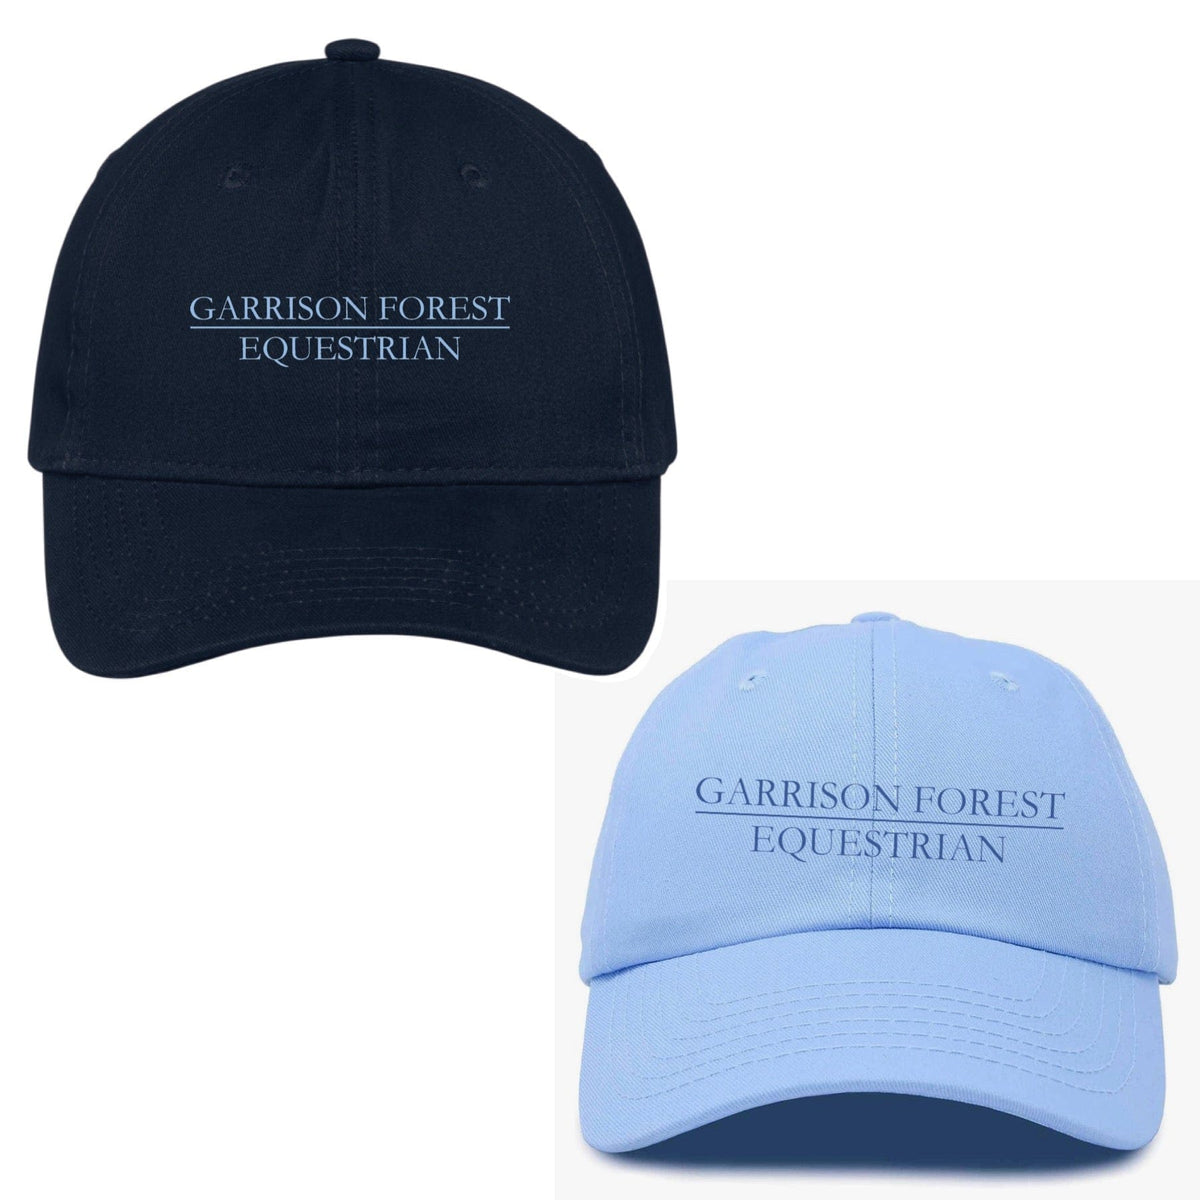 Equestrian Team Apparel Garrison Forest Equestrian Baseball Cap equestrian team apparel online tack store mobile tack store custom farm apparel custom show stable clothing equestrian lifestyle horse show clothing riding clothes horses equestrian tack store